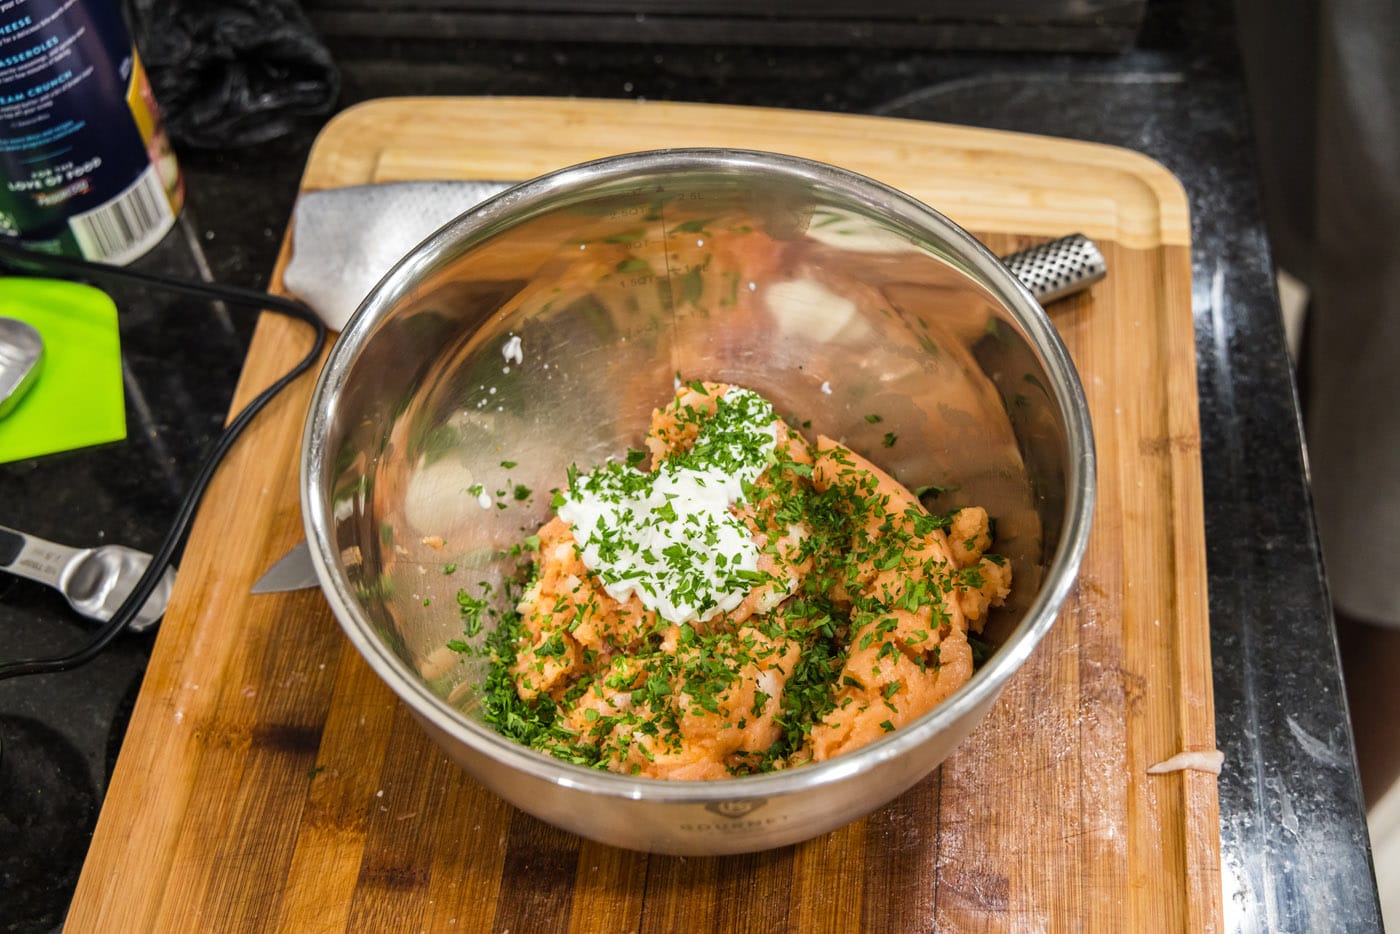 Adding yogurt and herbs to blended salmon mixture